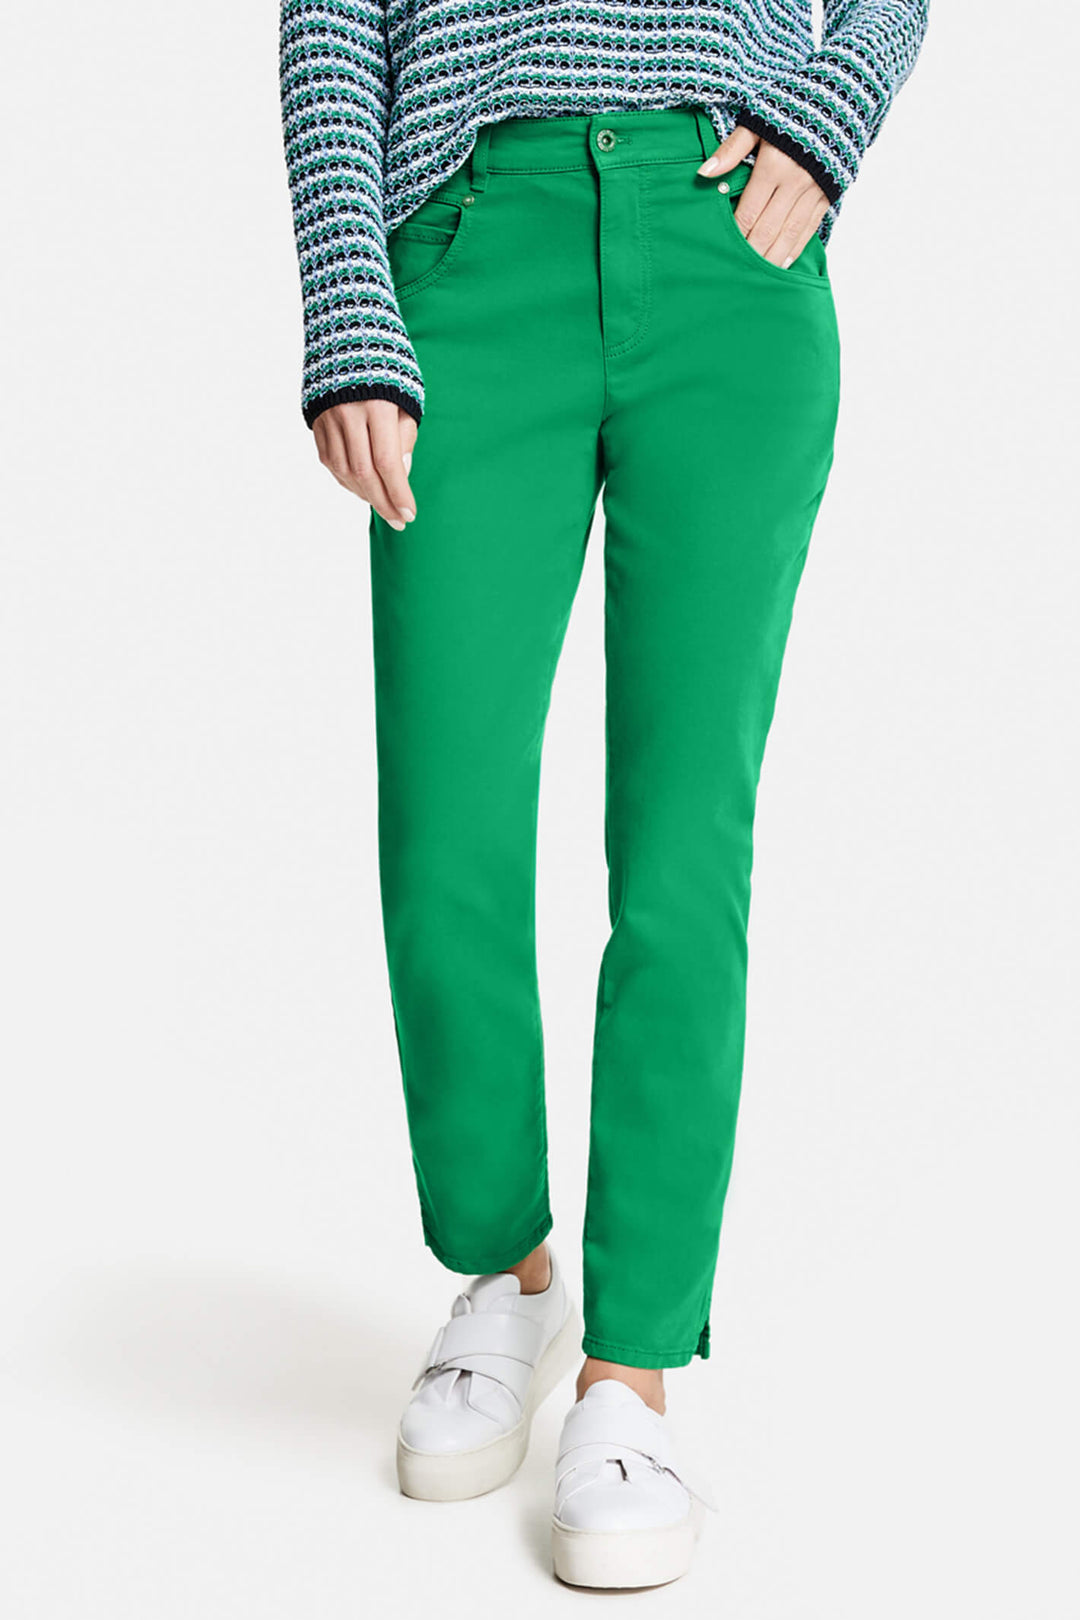 Gerry Weber 120001 Vibrant Green Jeans - Experience Boutique